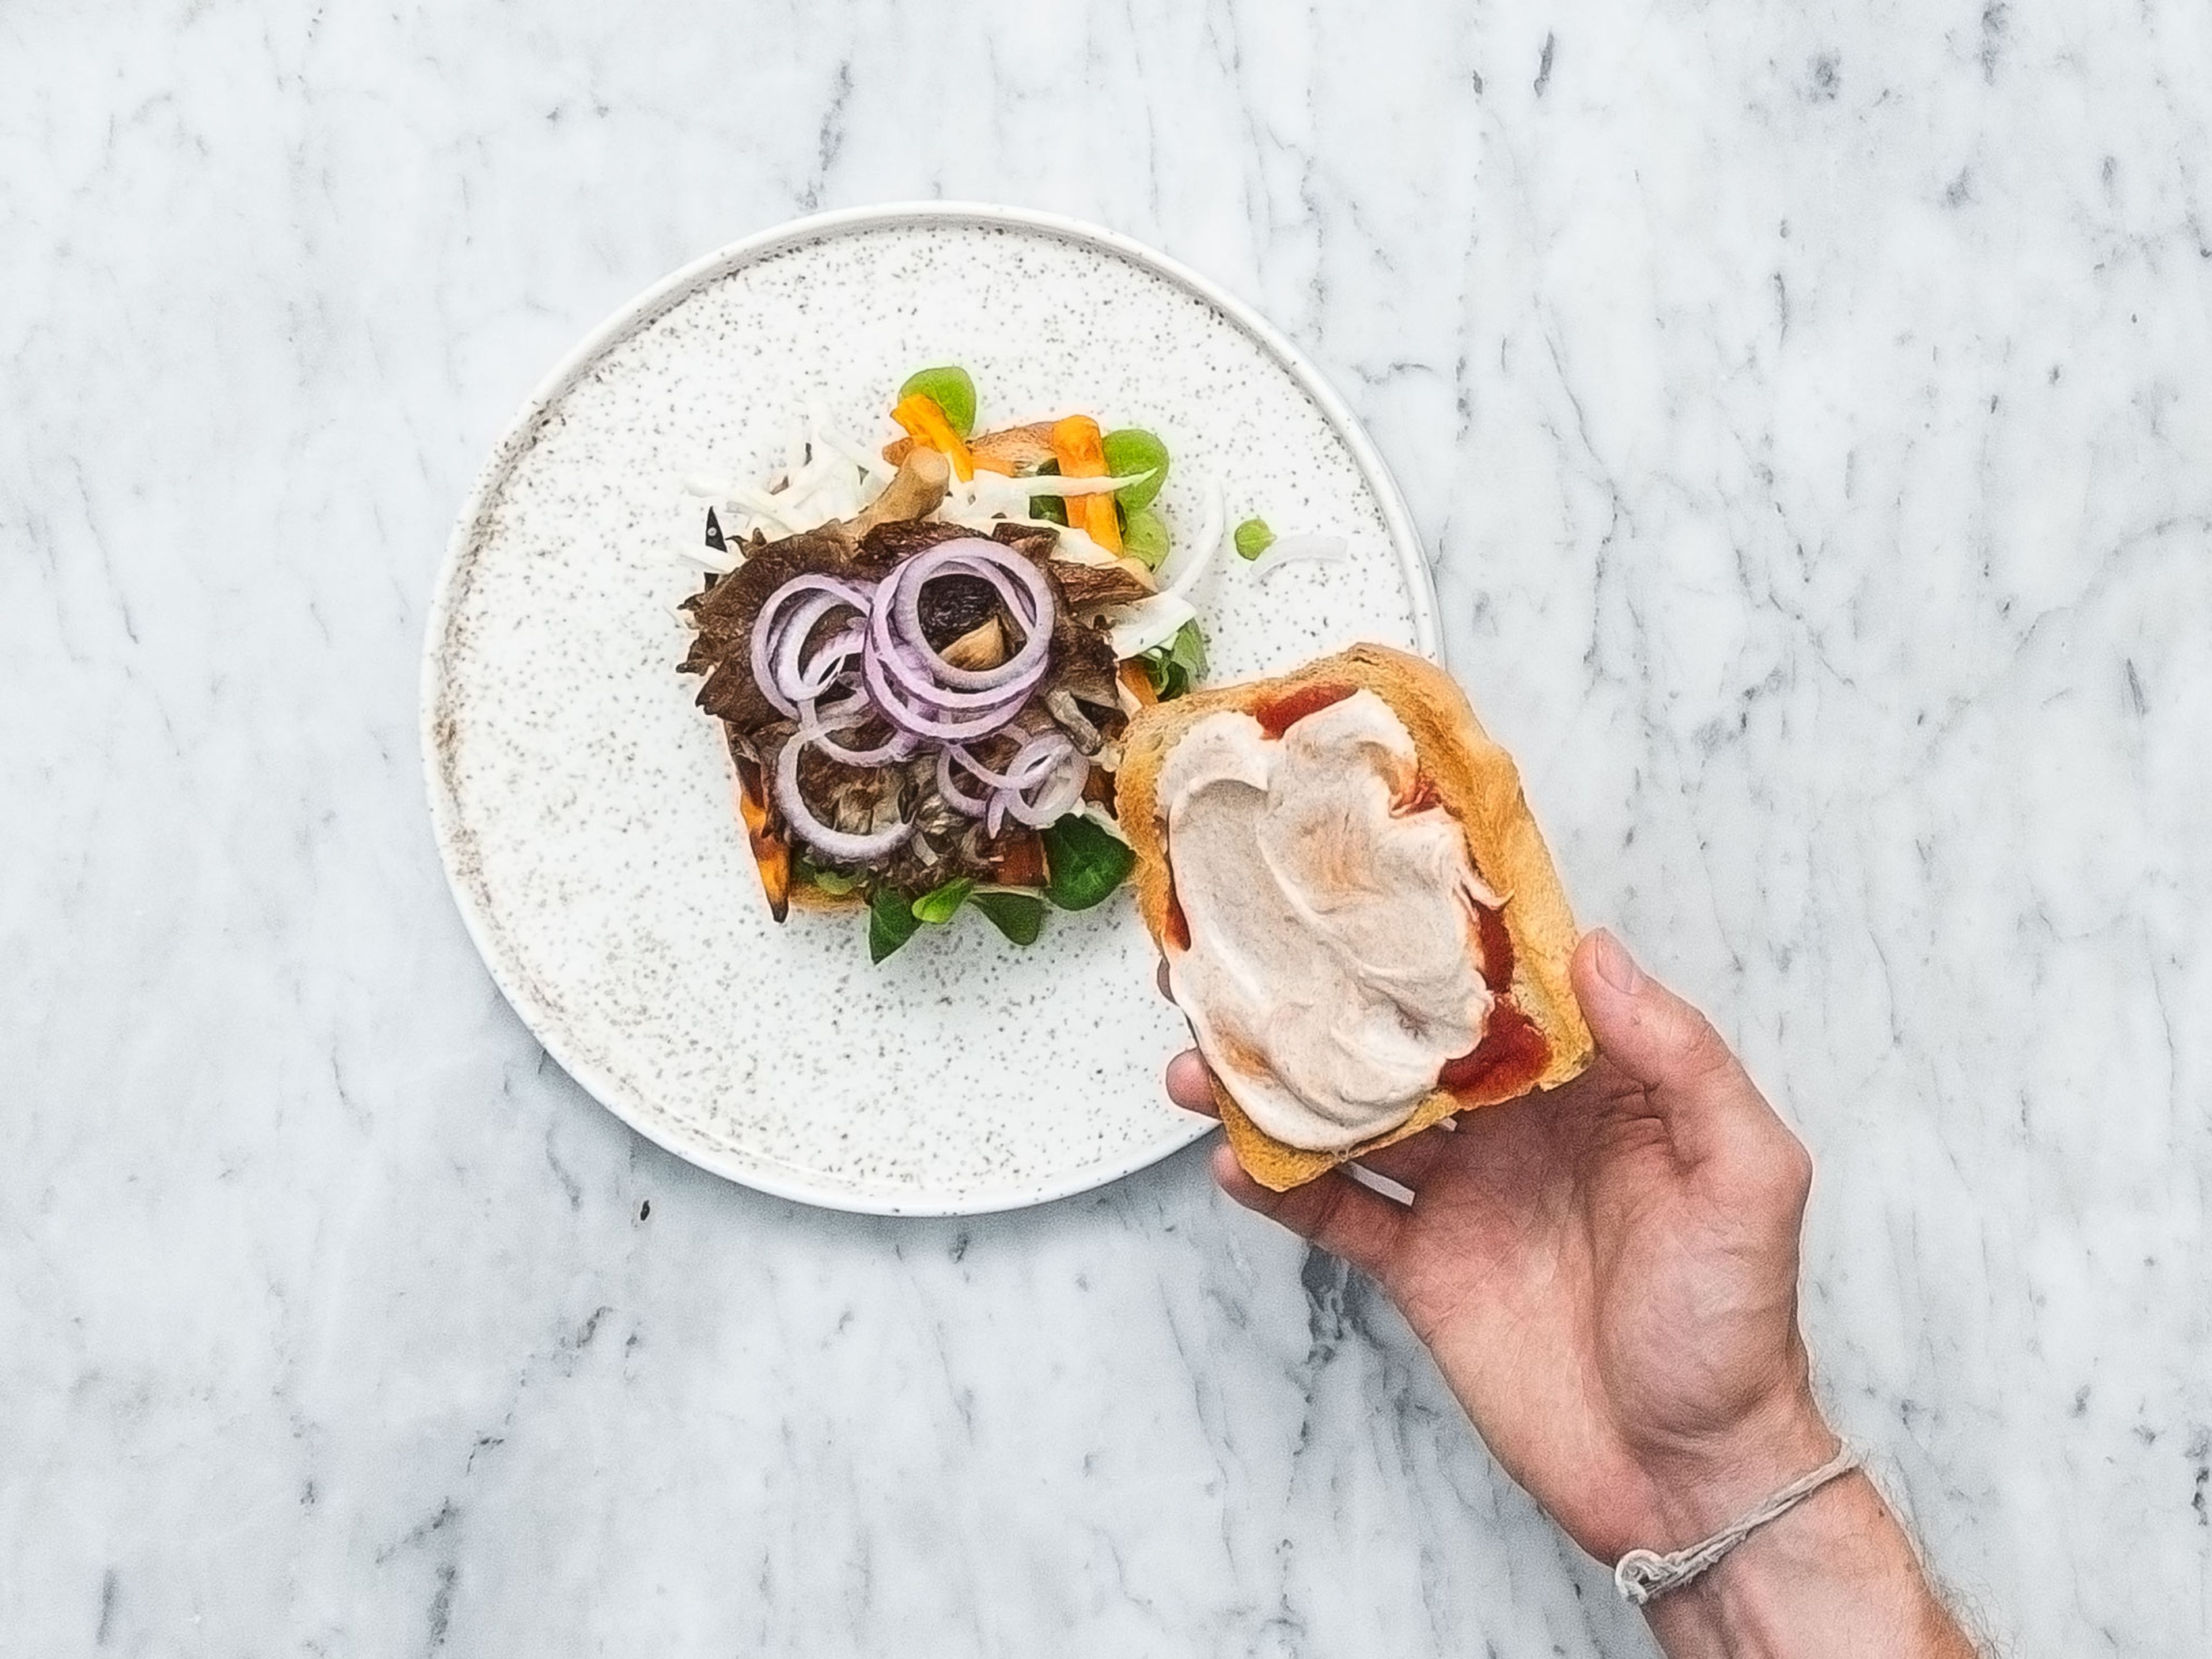 Spread some ketchup and vegan spicy cinnamon mayonnaise on each toasted white bread slice. Top half of the slices with lamb’s lettuce, sweet potato fries, white cabbage slaw, fried oyster mushrooms, and some sliced red onion. Place remaining white bread slices on top. Enjoy!